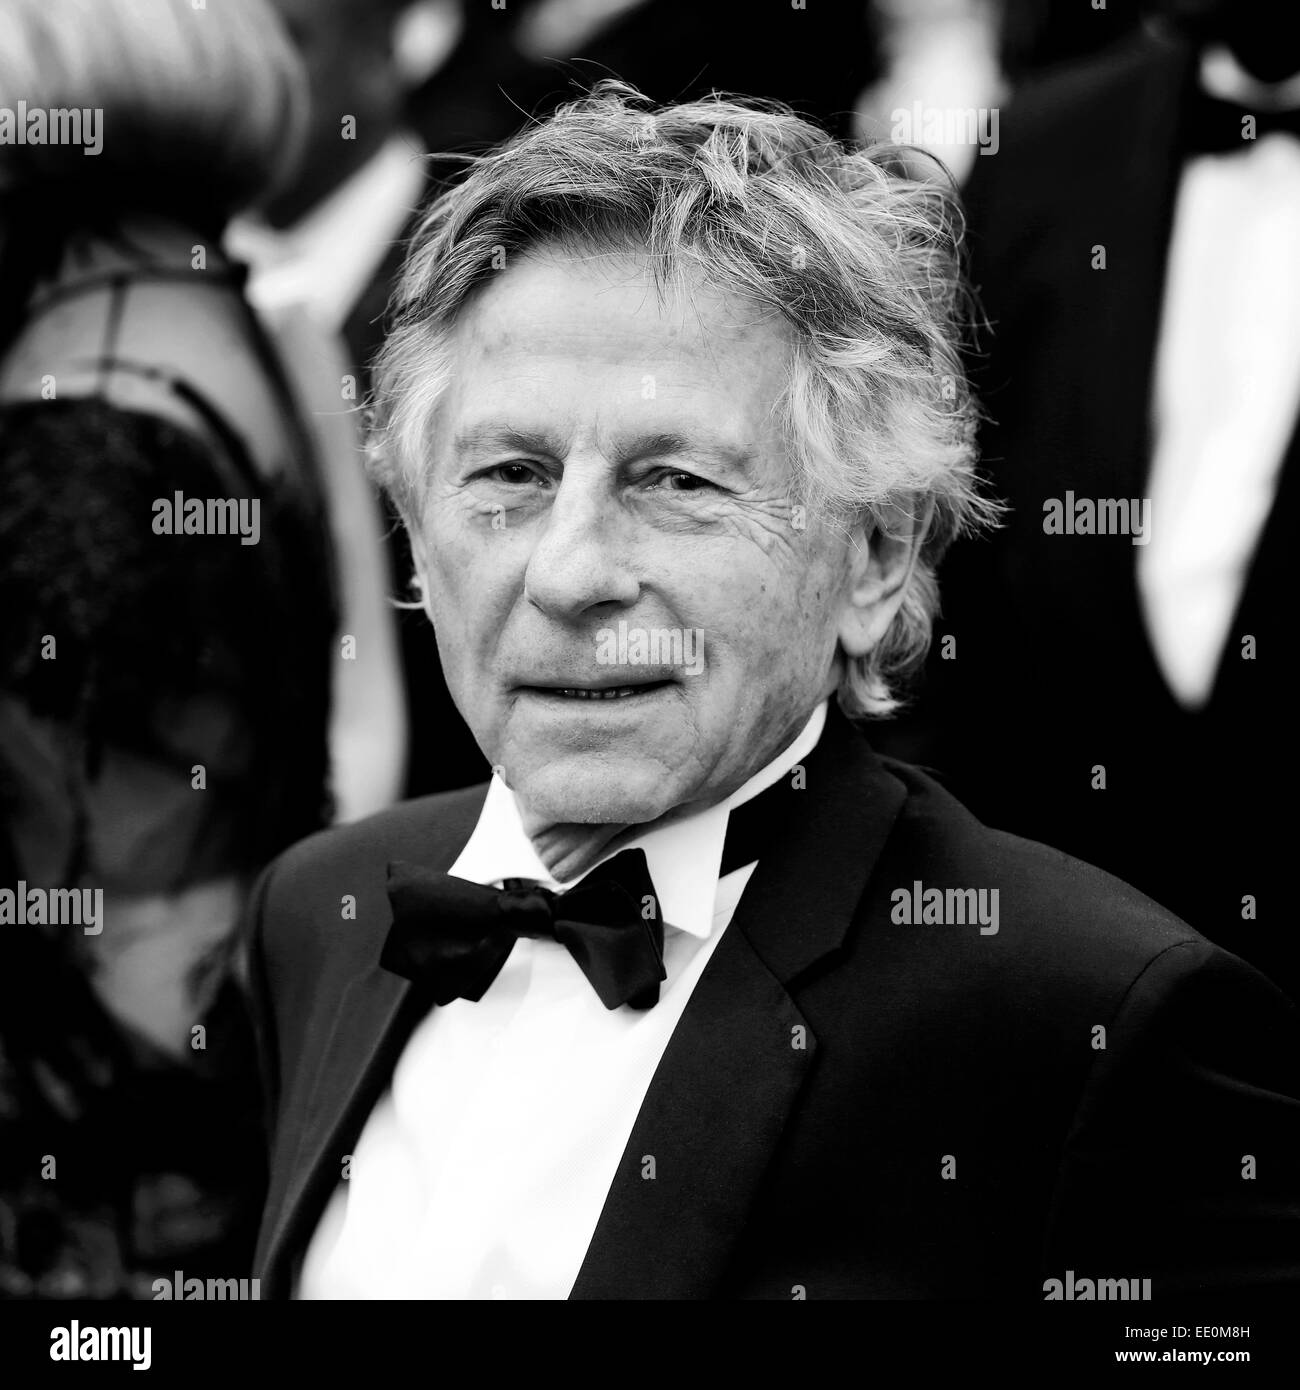 CANNES, FRANCE - MAY 17: Roman Polanski attends the 'Saint Laurent' premiere during the 67th Cannes Film Festival on May 17, 201 Stock Photo